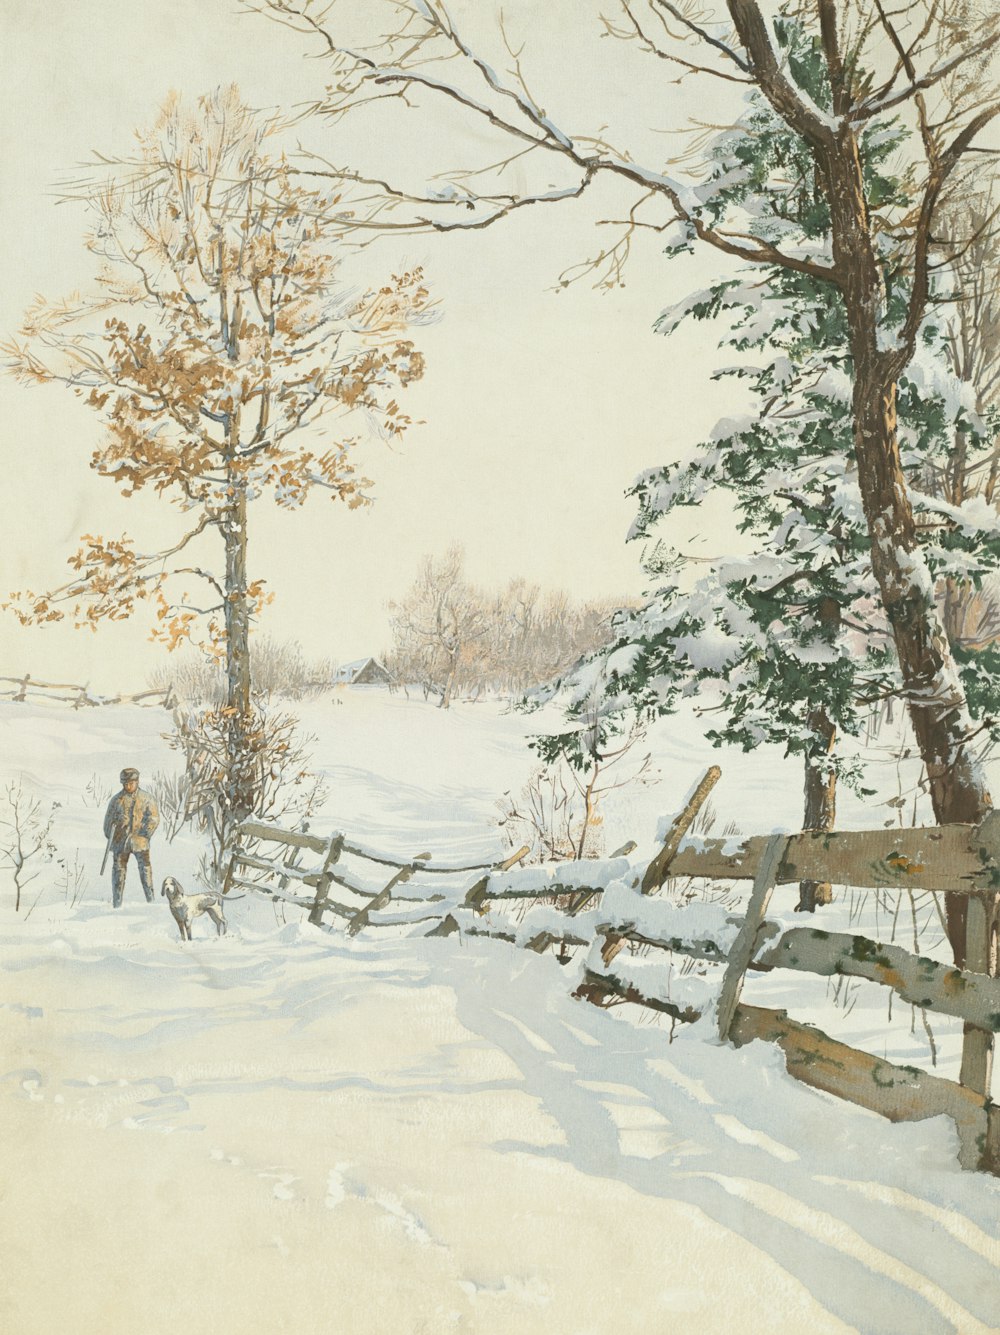 a painting of two people walking through the snow